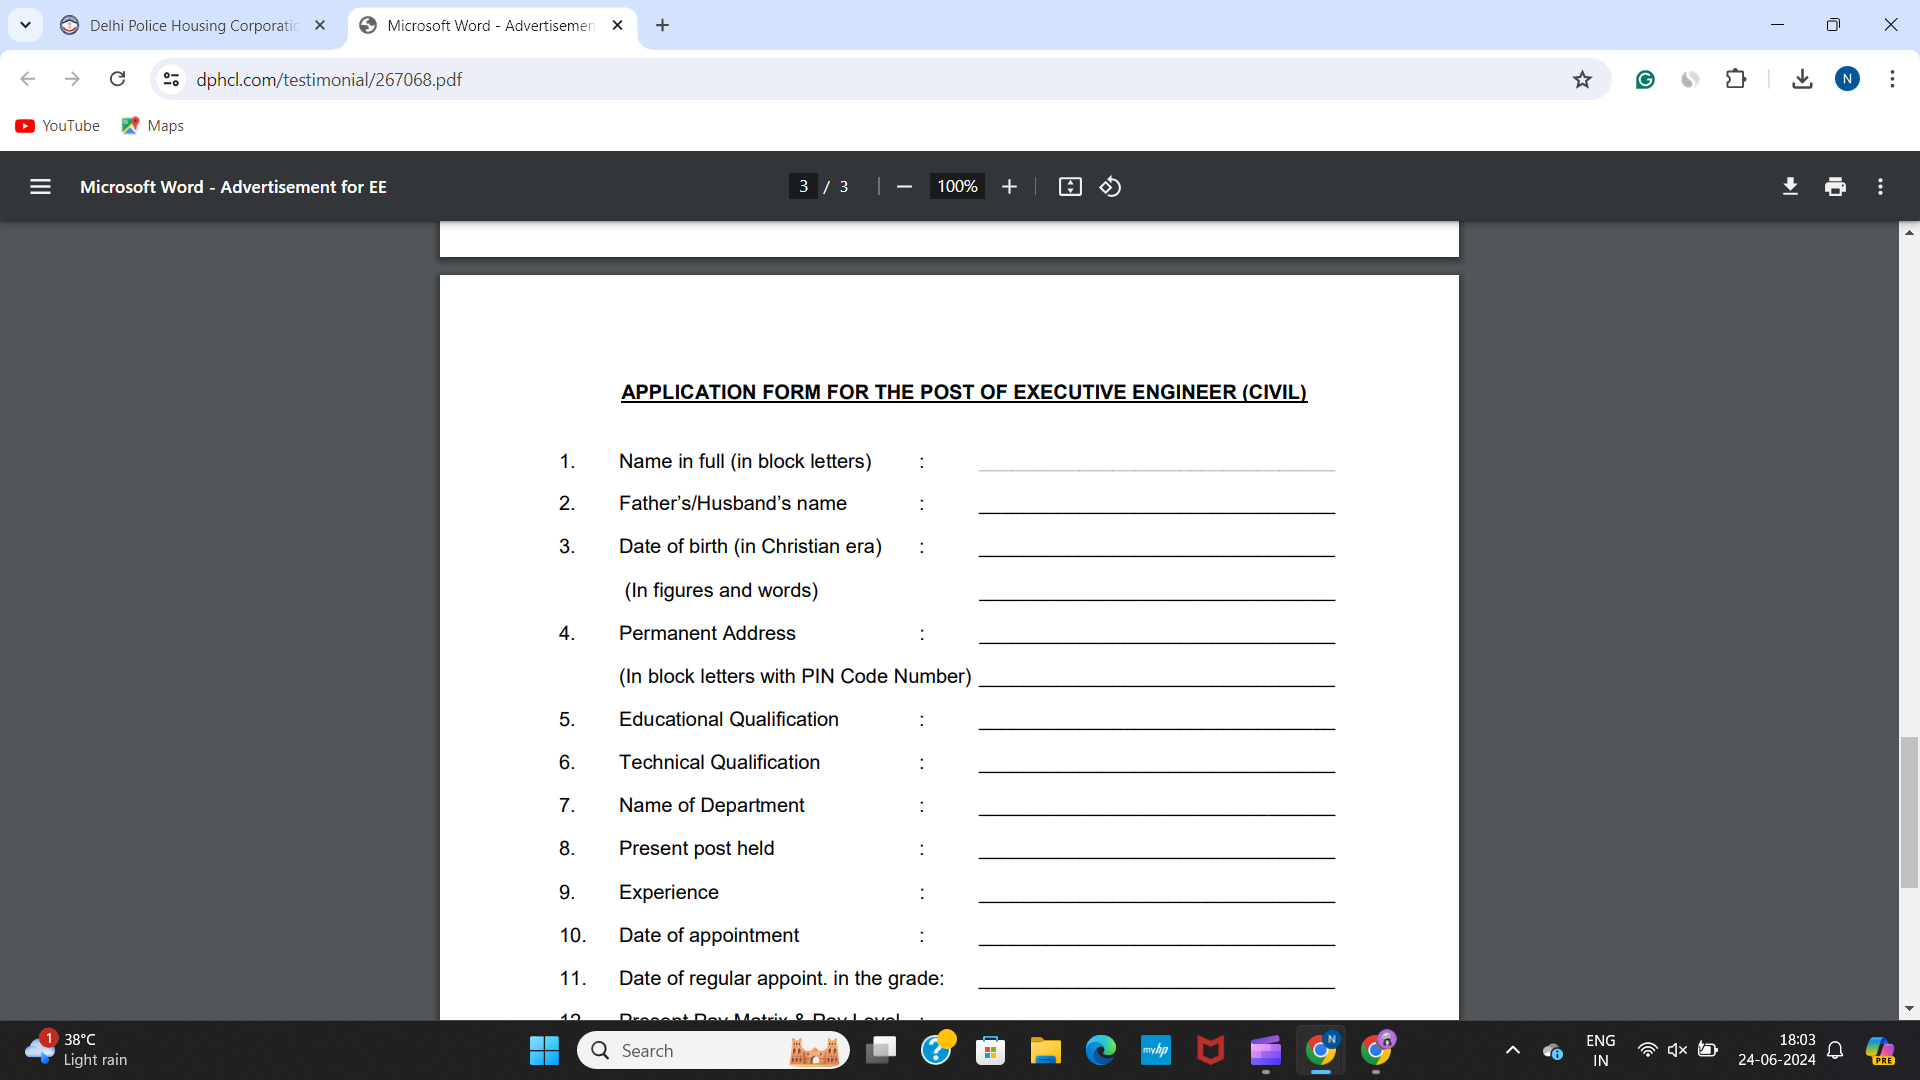 DPHCL Application Form